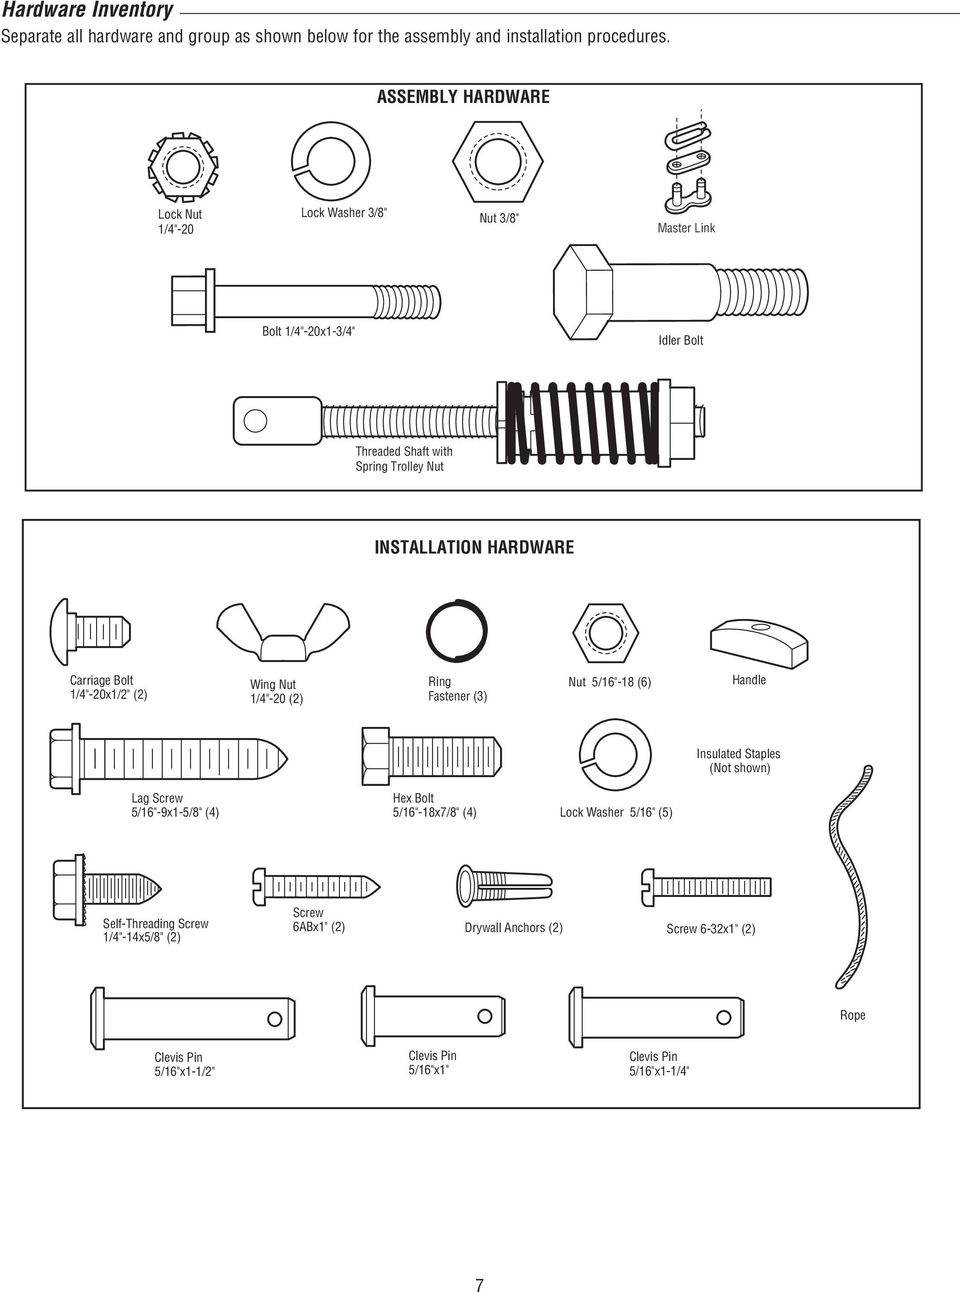 HARDWARE Carriage Bolt 1/4"-20x1/2" (2) Wing Nut 1/4"-20 (2) Ring Fastener (3) Nut 5/16"-18 (6) Handle Insulated Staples (Not shown) Lag Screw 5/16"-9x1-5/8" (4)